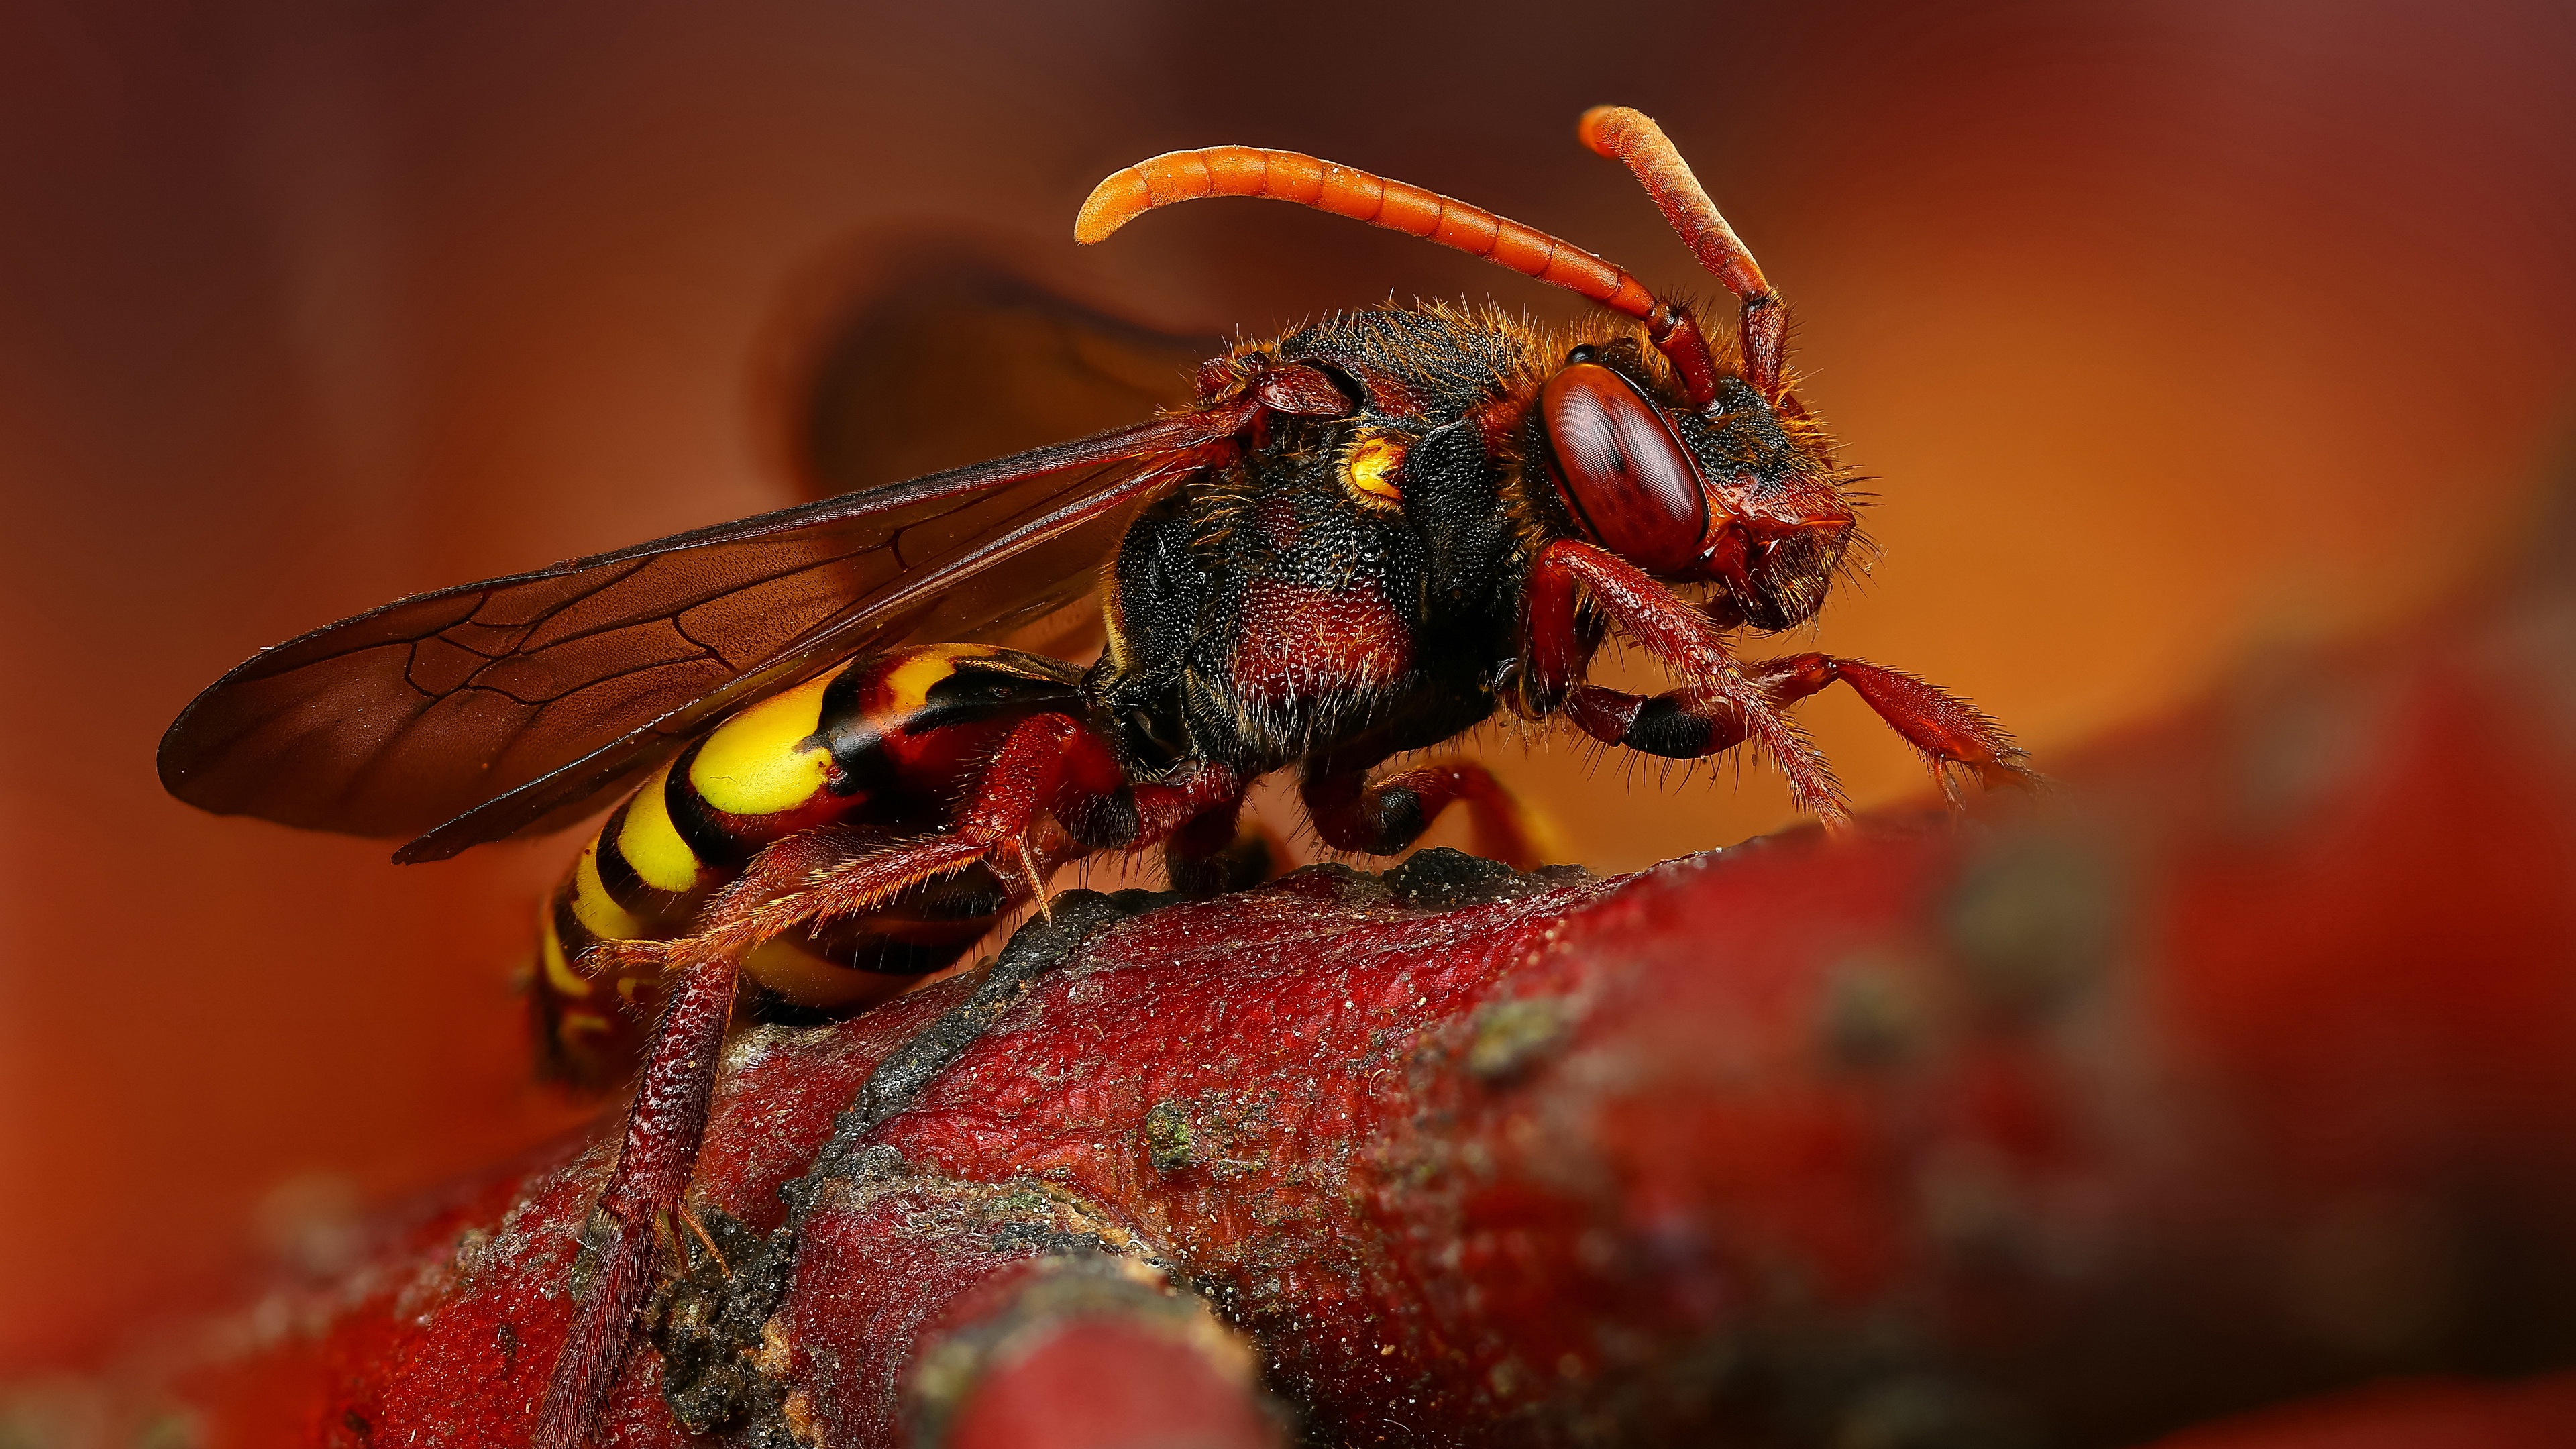 Copper Wasp Wallpapers